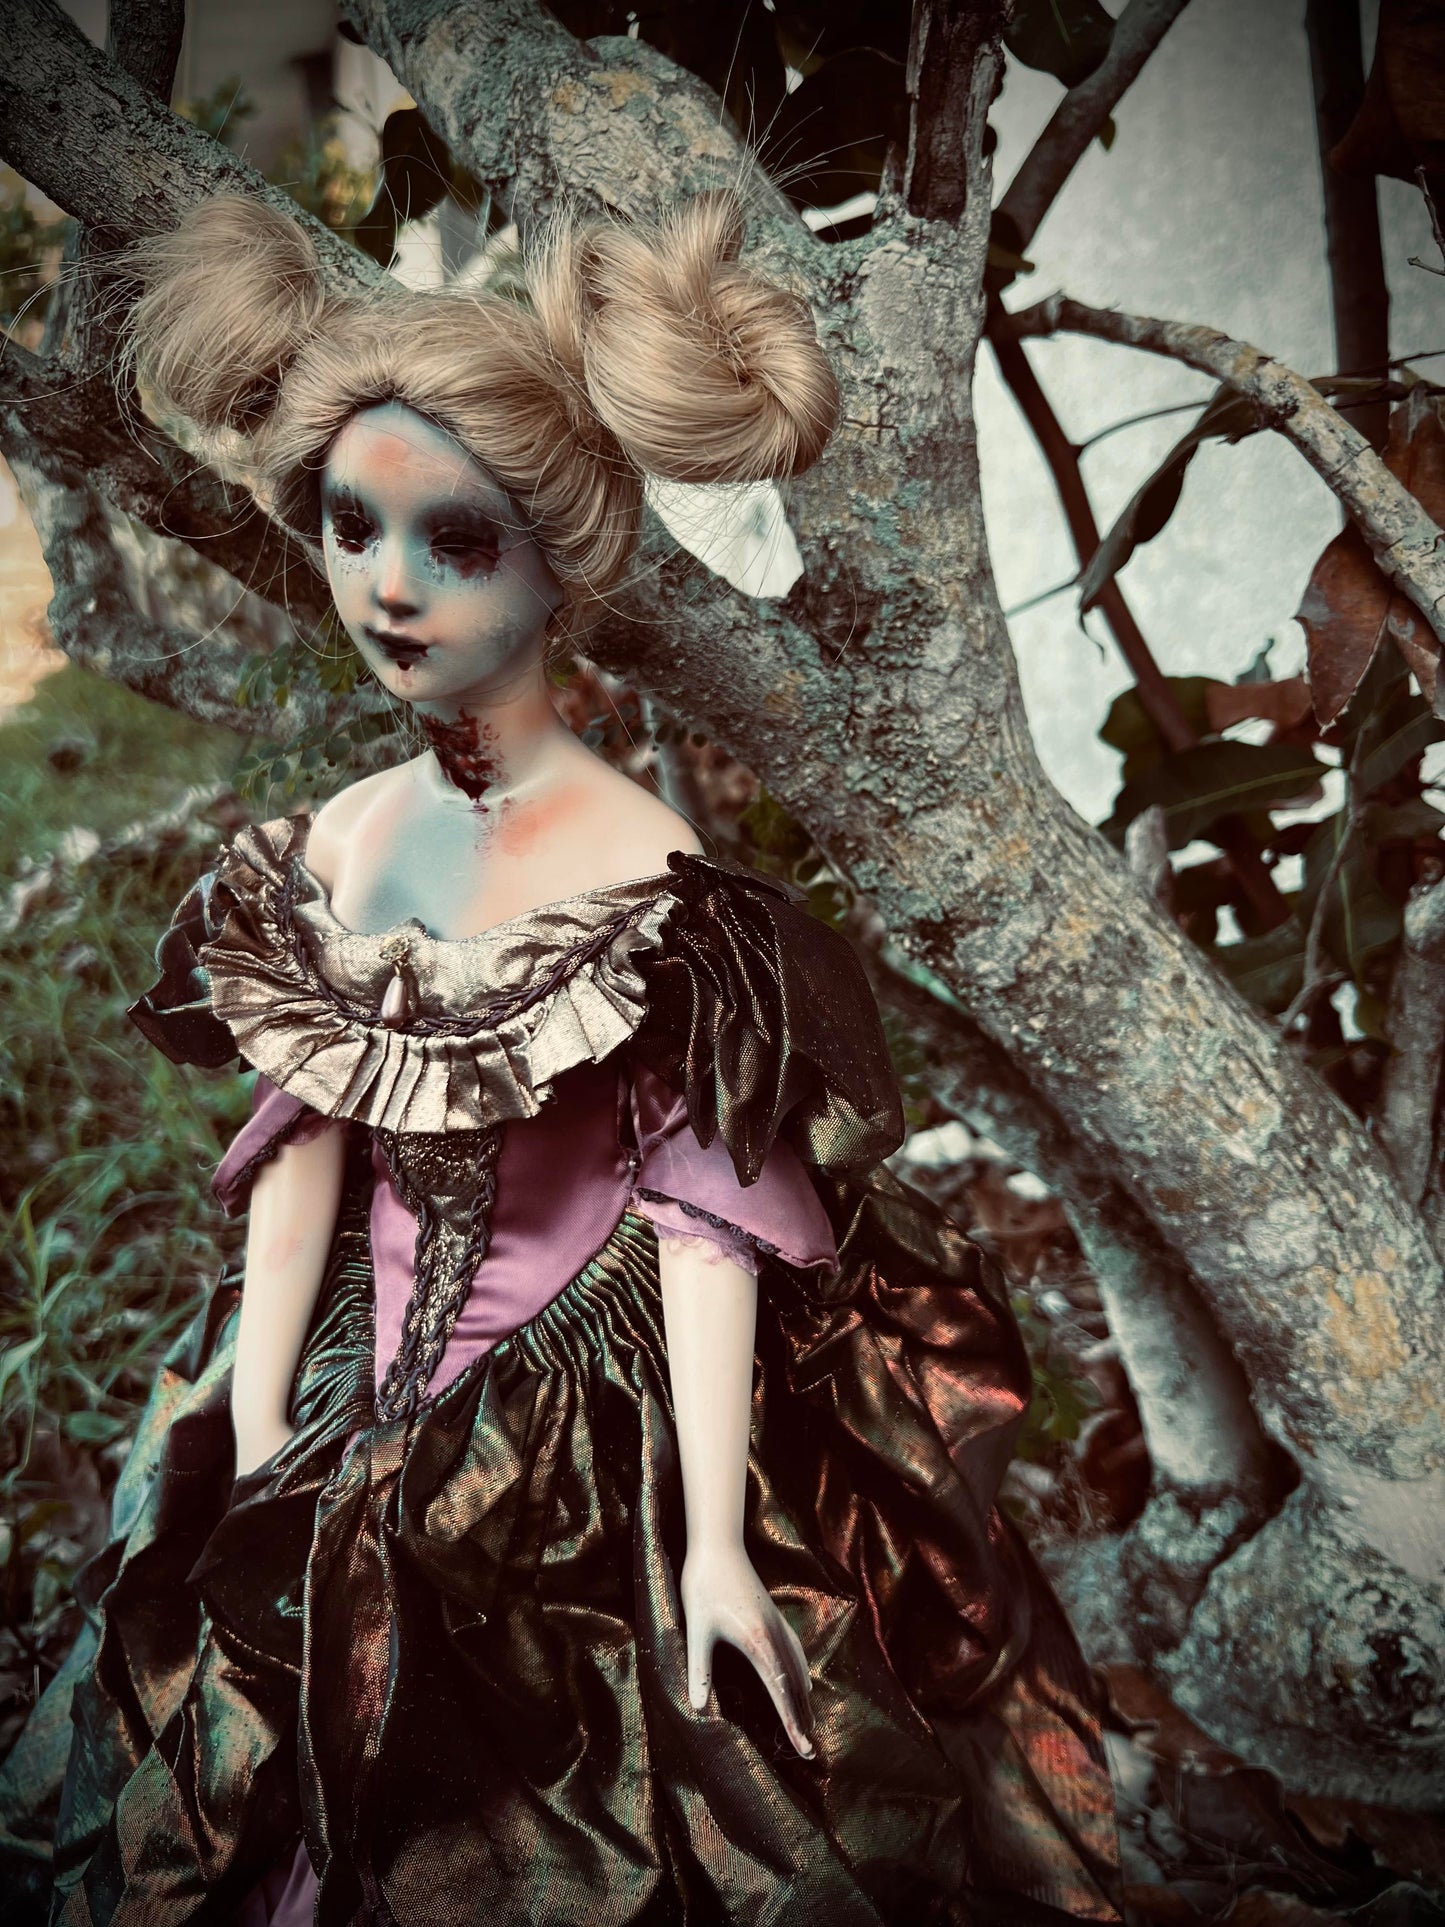 Meet Piper 19" Doll Porcelain Witchy Creepy Haunted Spirit Infected Scary Poltergeist Spooky Wicca Possessed Fall Gothic Positive Energy